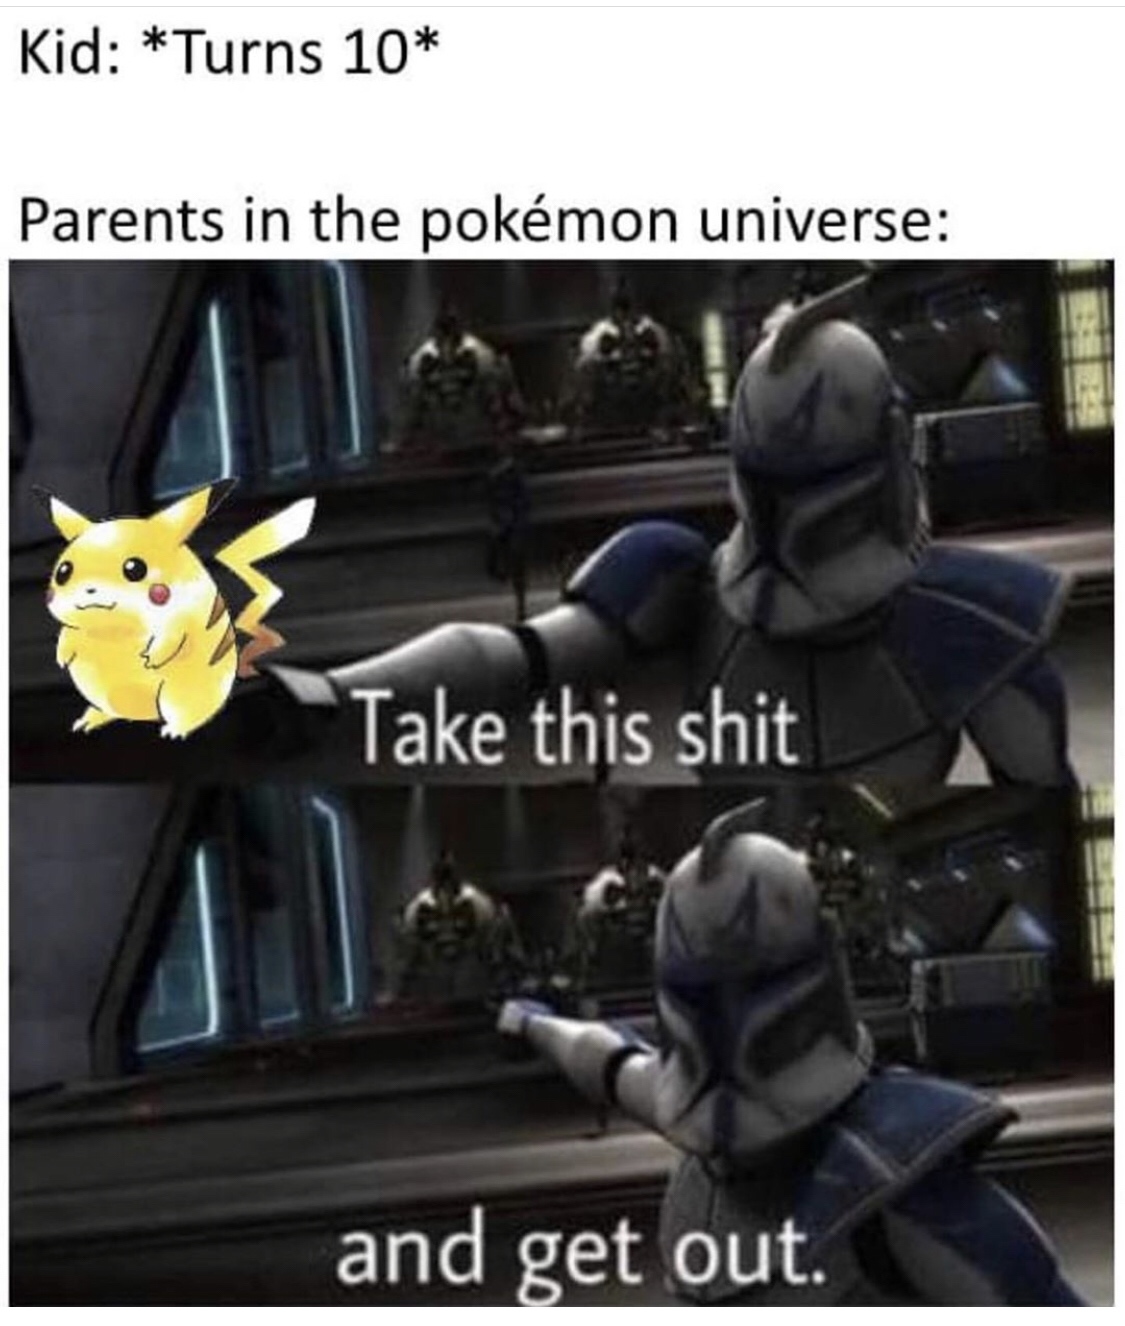 take this and get out meme - Kid Turns 10 Parents in the pokmon universe Take this shit and get out.